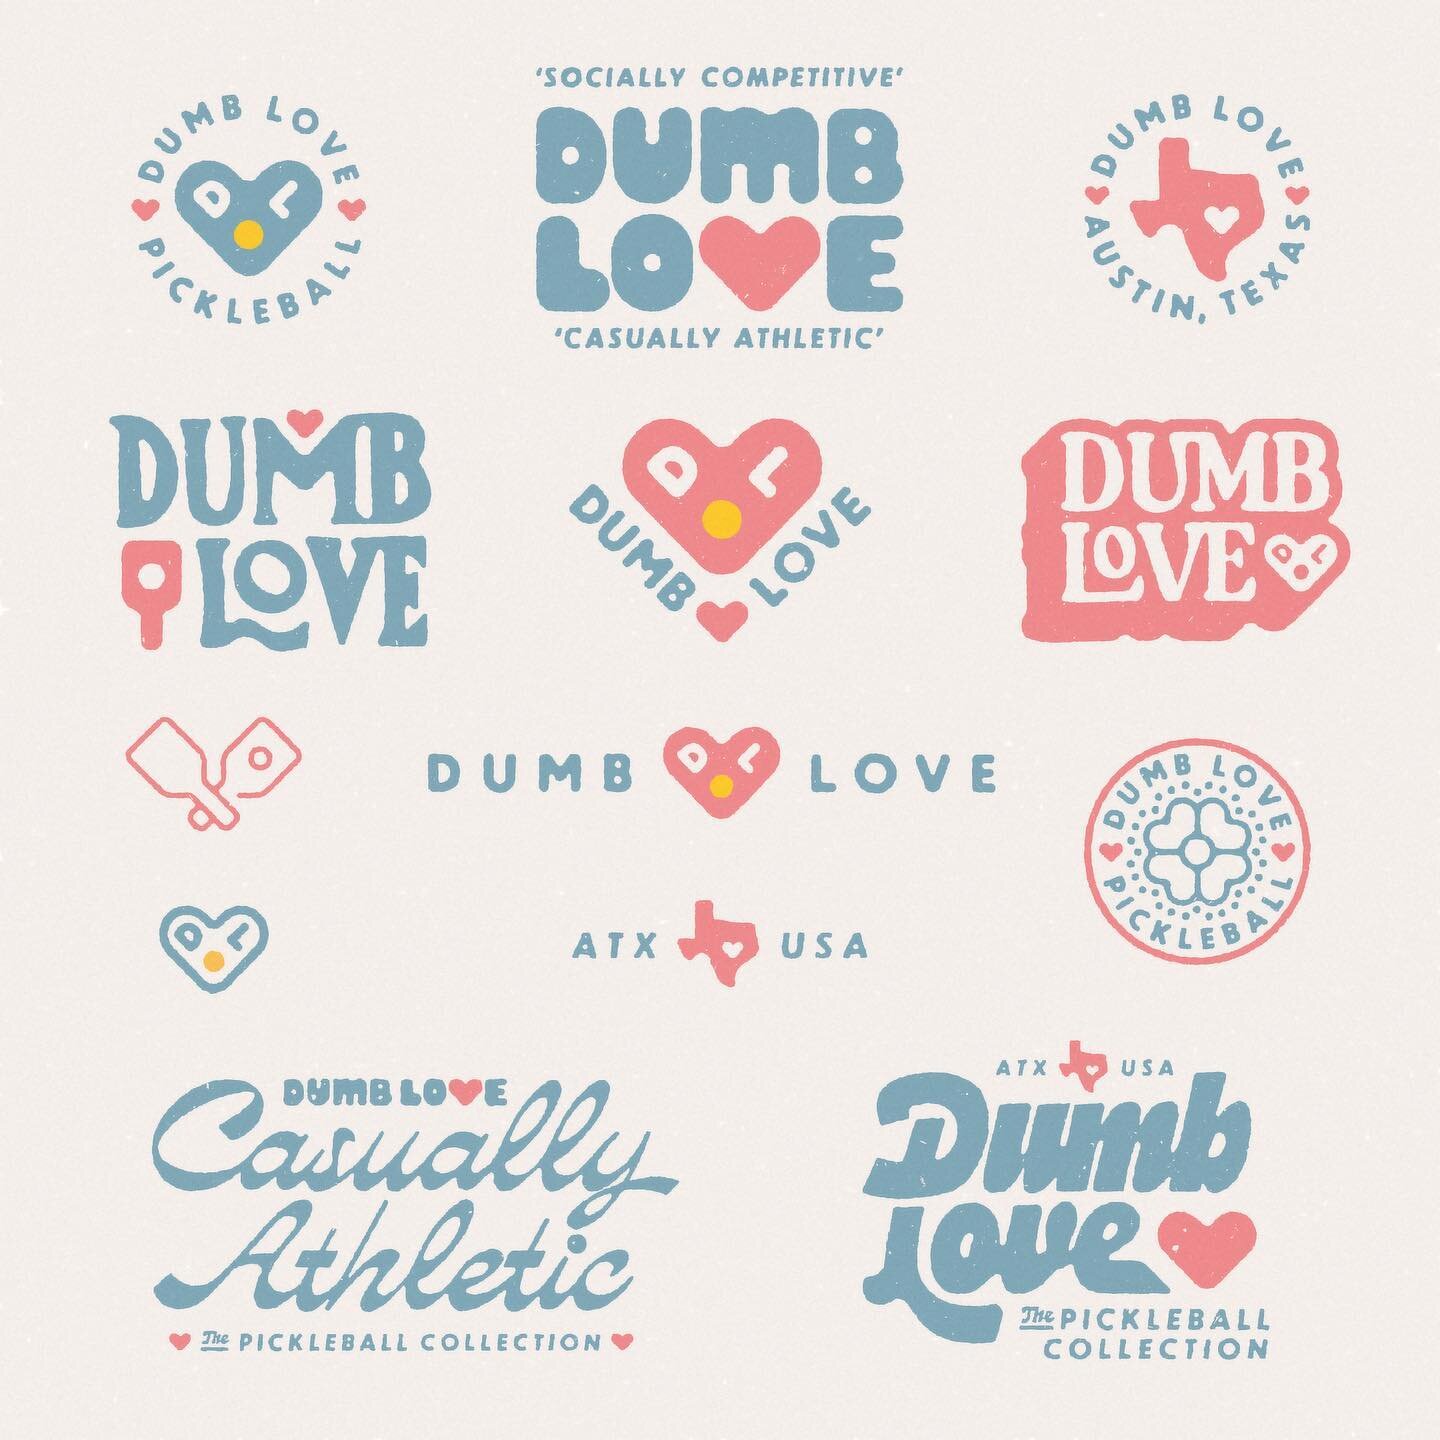 branding for @dumbloveclub , a pickleball apparel company here in ATX. The team wanted a versatile, classic retro aesthetic, and it was great fun exploring a variety of marks centered around the simple heart icon, leaving room to expand into more spo